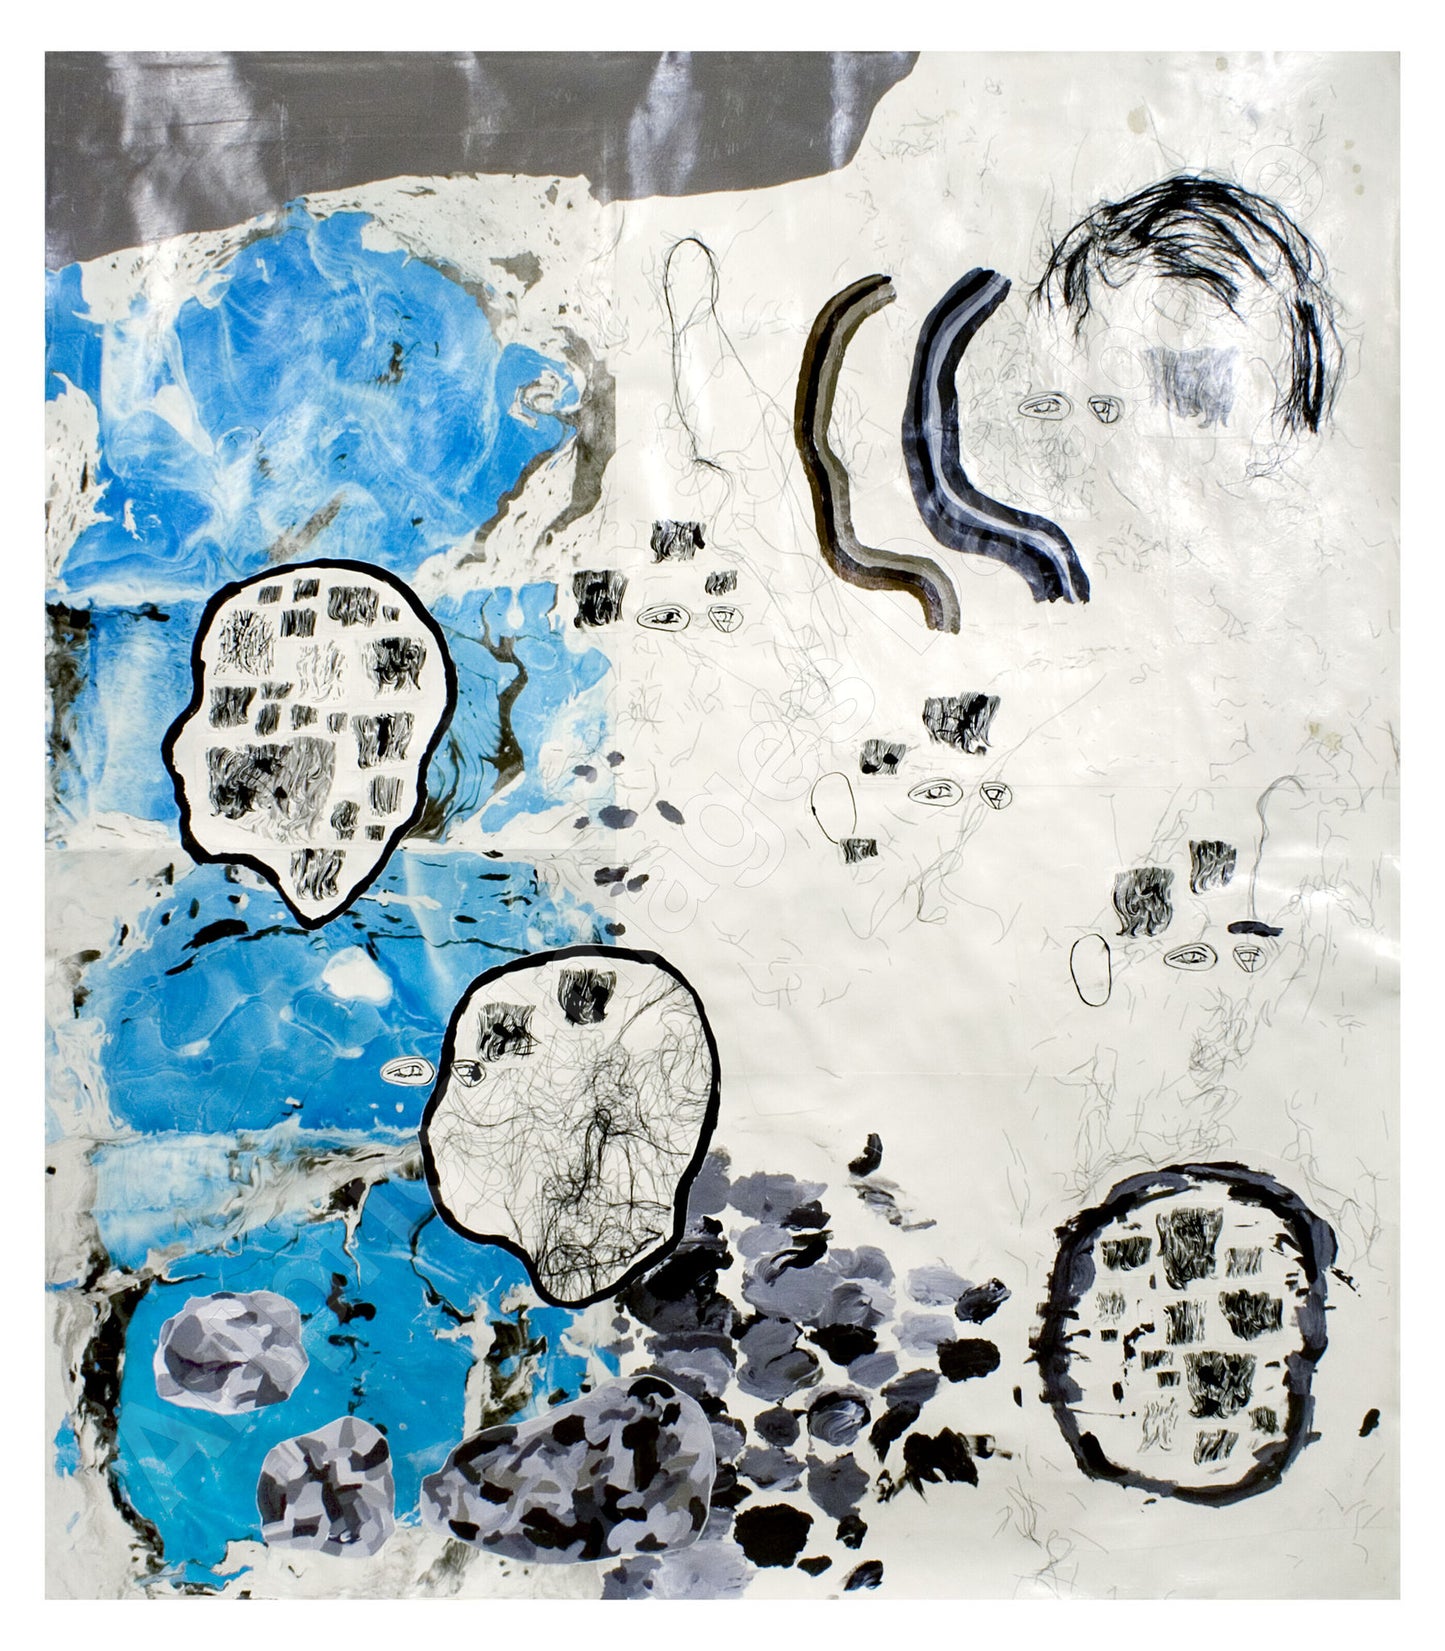 Carter (USA) | Untit. (2006 #53), 2006 | Acrylic, ink, synthetic hair, graphite, collage, paper, 121x108 (131x116)